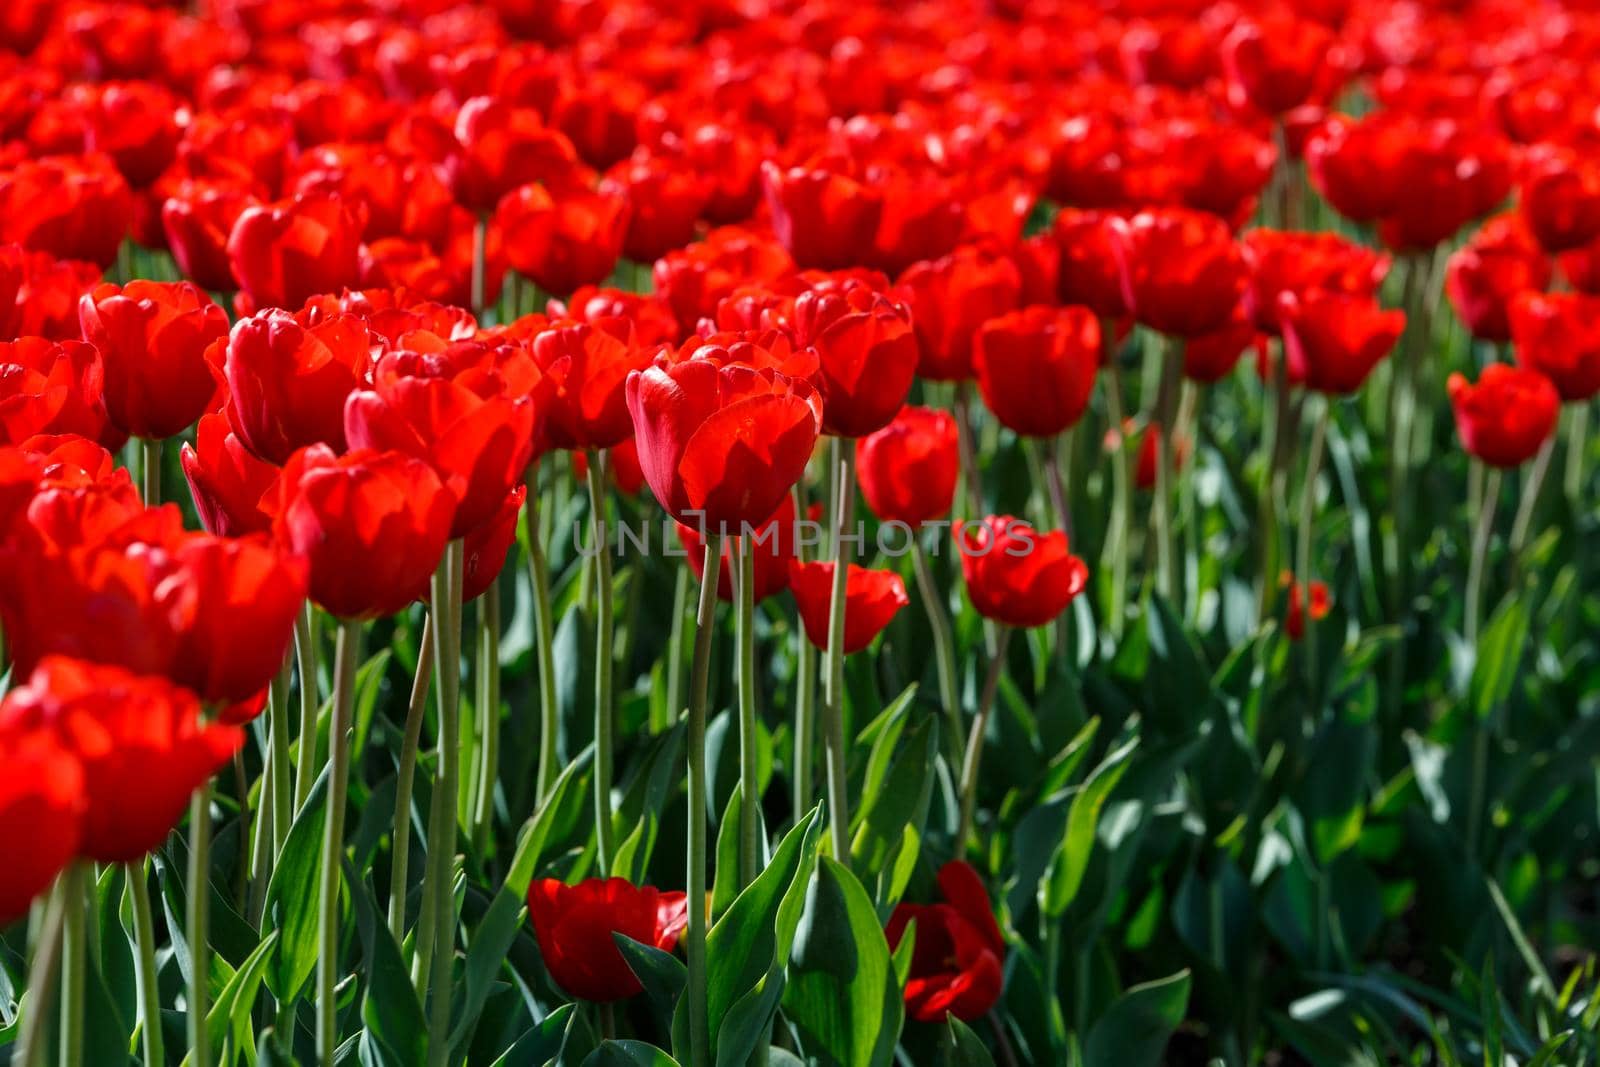 flaccid red tulips in the field at spring daylight - close-up full frame background with selective focus